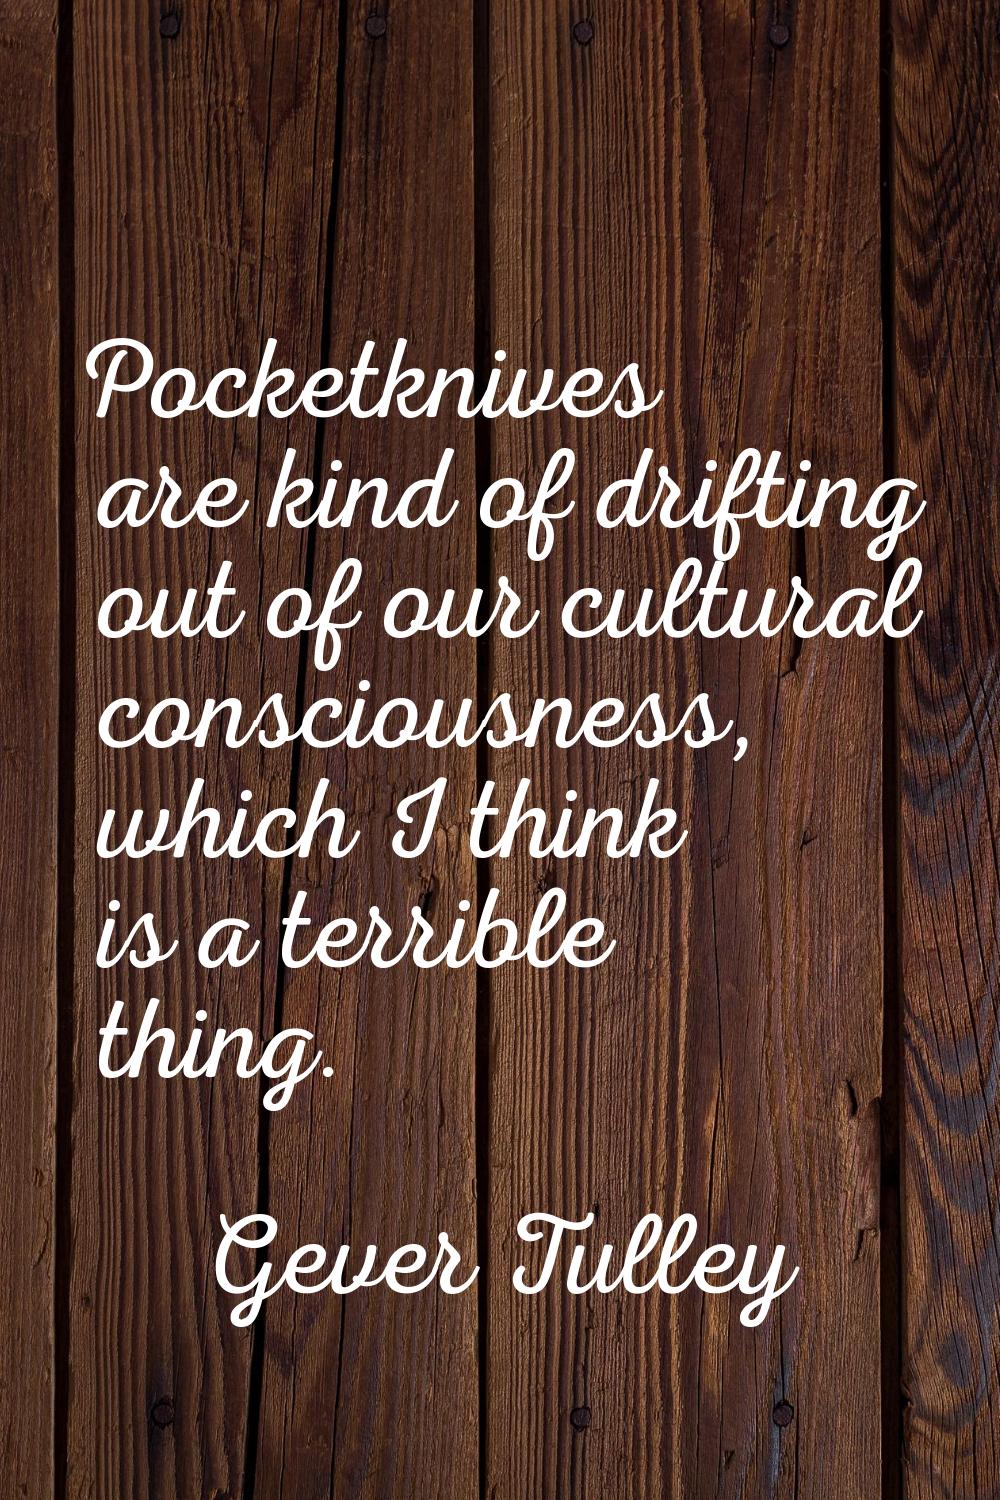 Pocketknives are kind of drifting out of our cultural consciousness, which I think is a terrible th